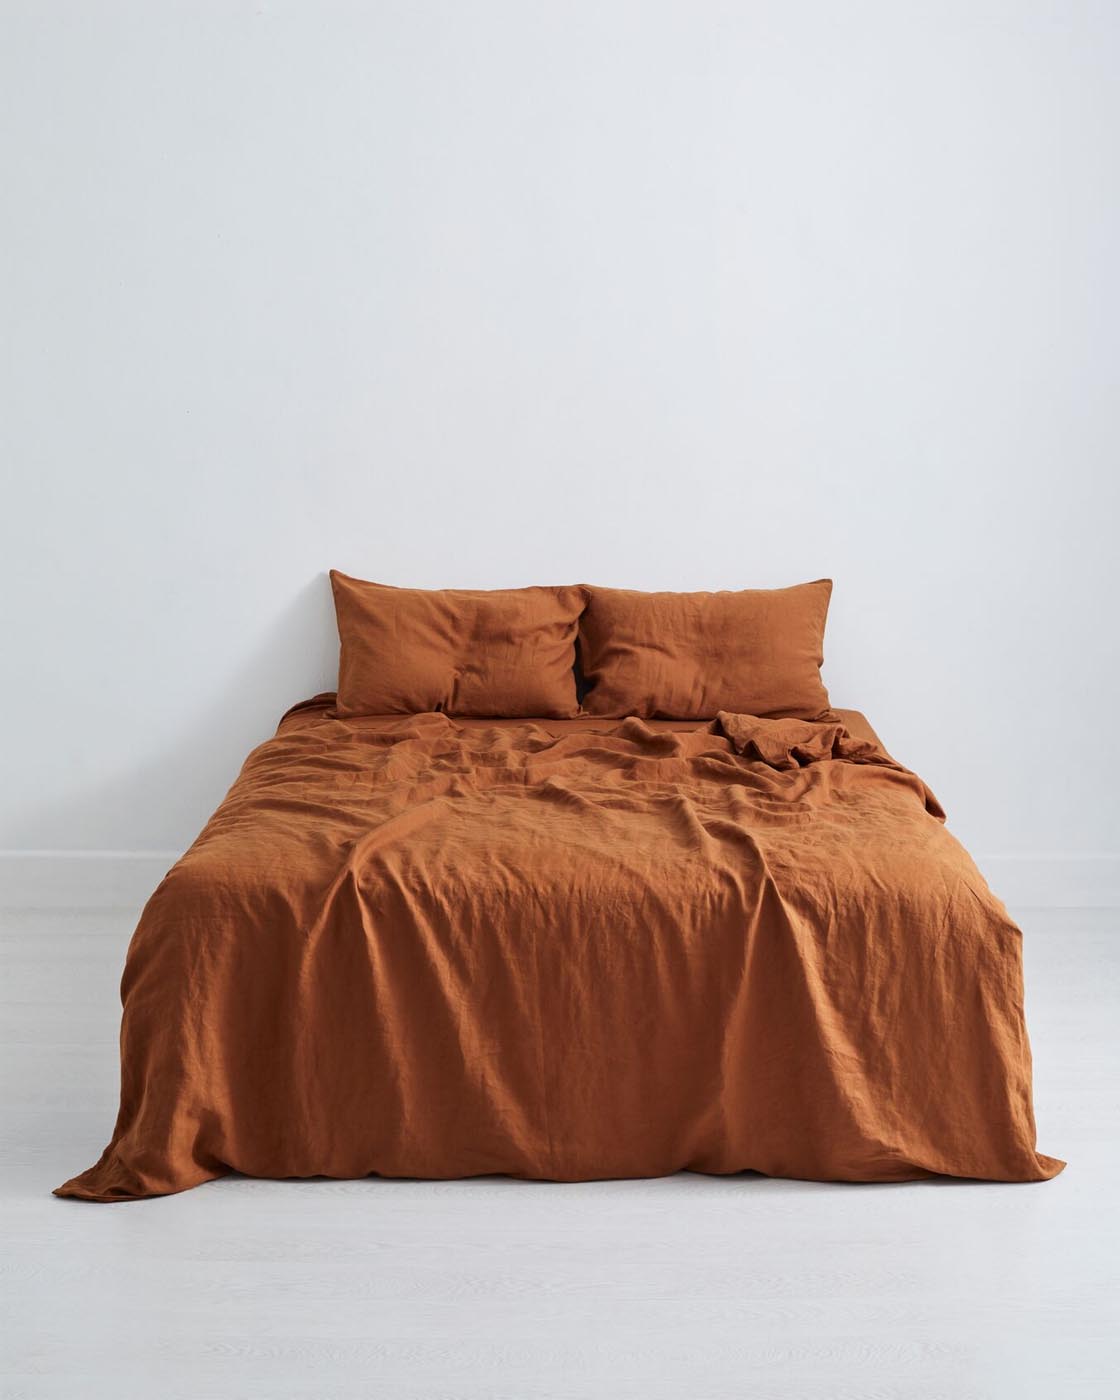 Bed Threads- Rust 100% Flax Linen Bedding Set in KING size